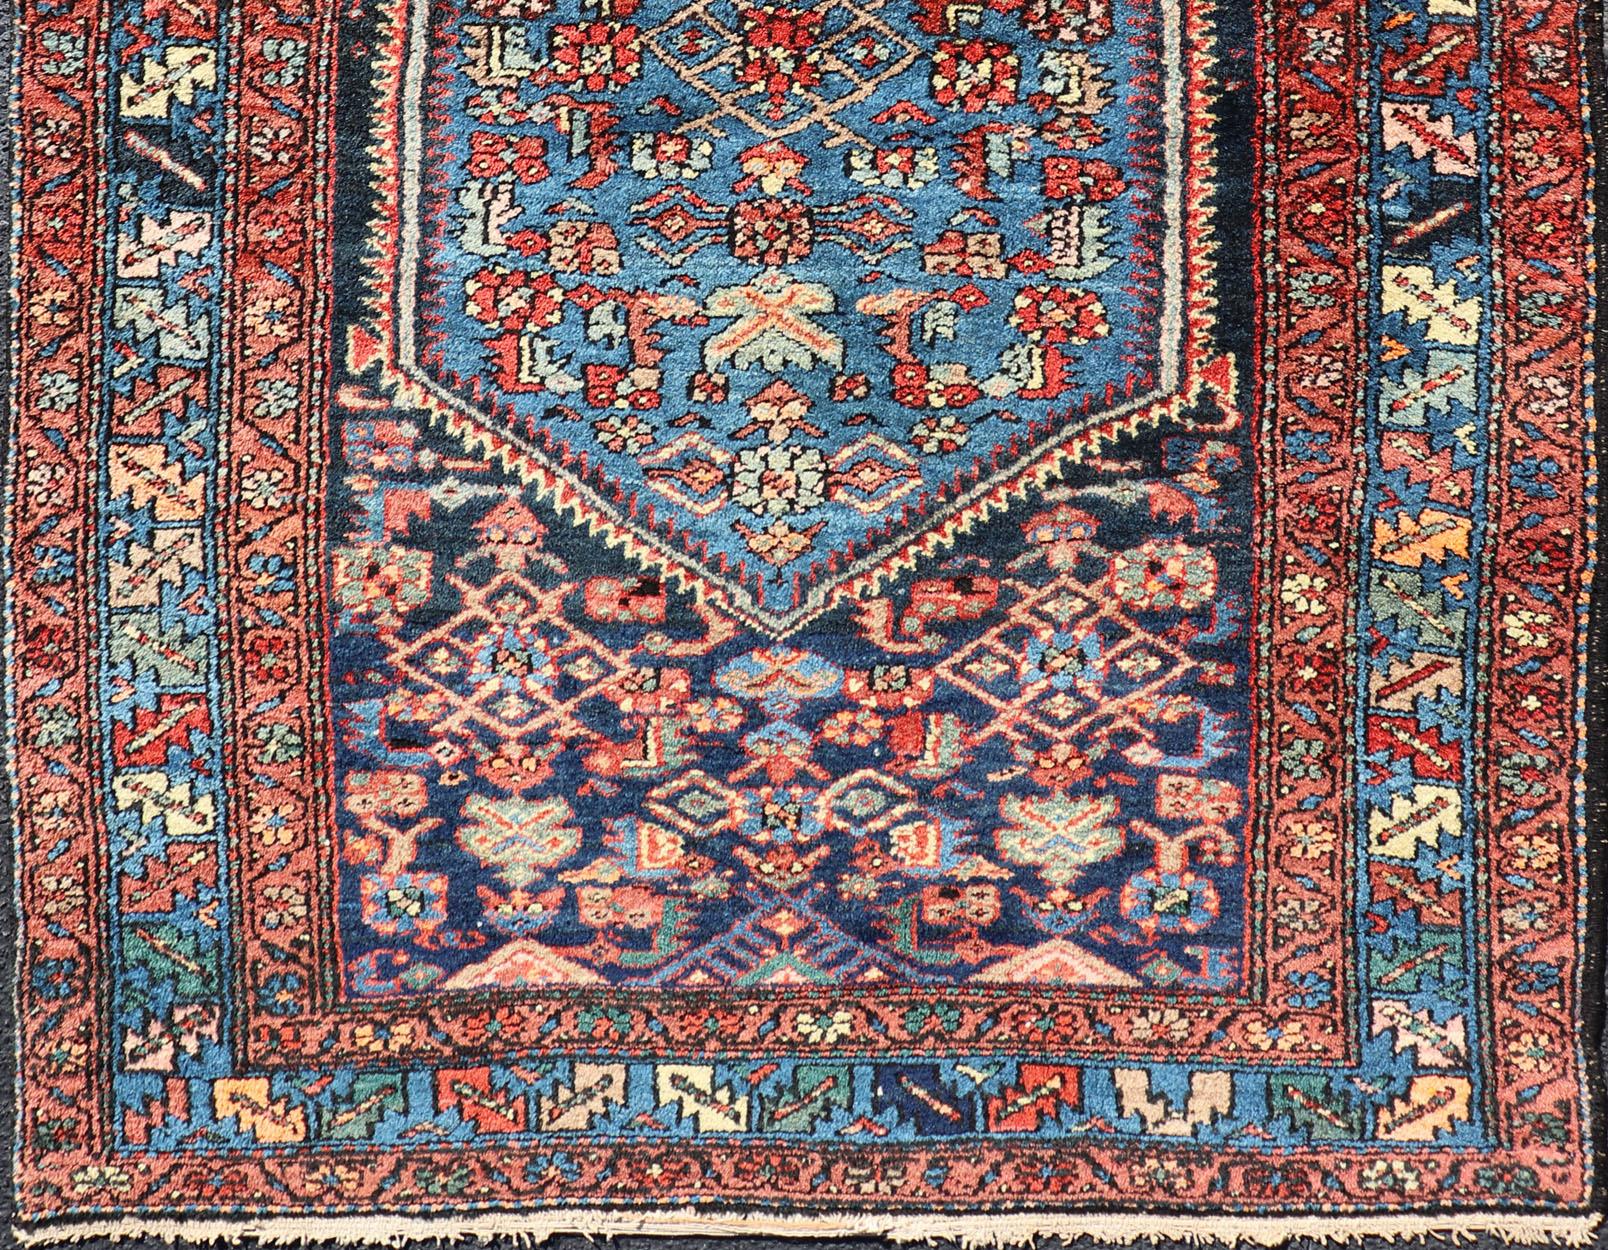 Hand-Knotted Antique Persian Bidjar Carpet with Variety of Blue Colors, Red, and Salmon For Sale